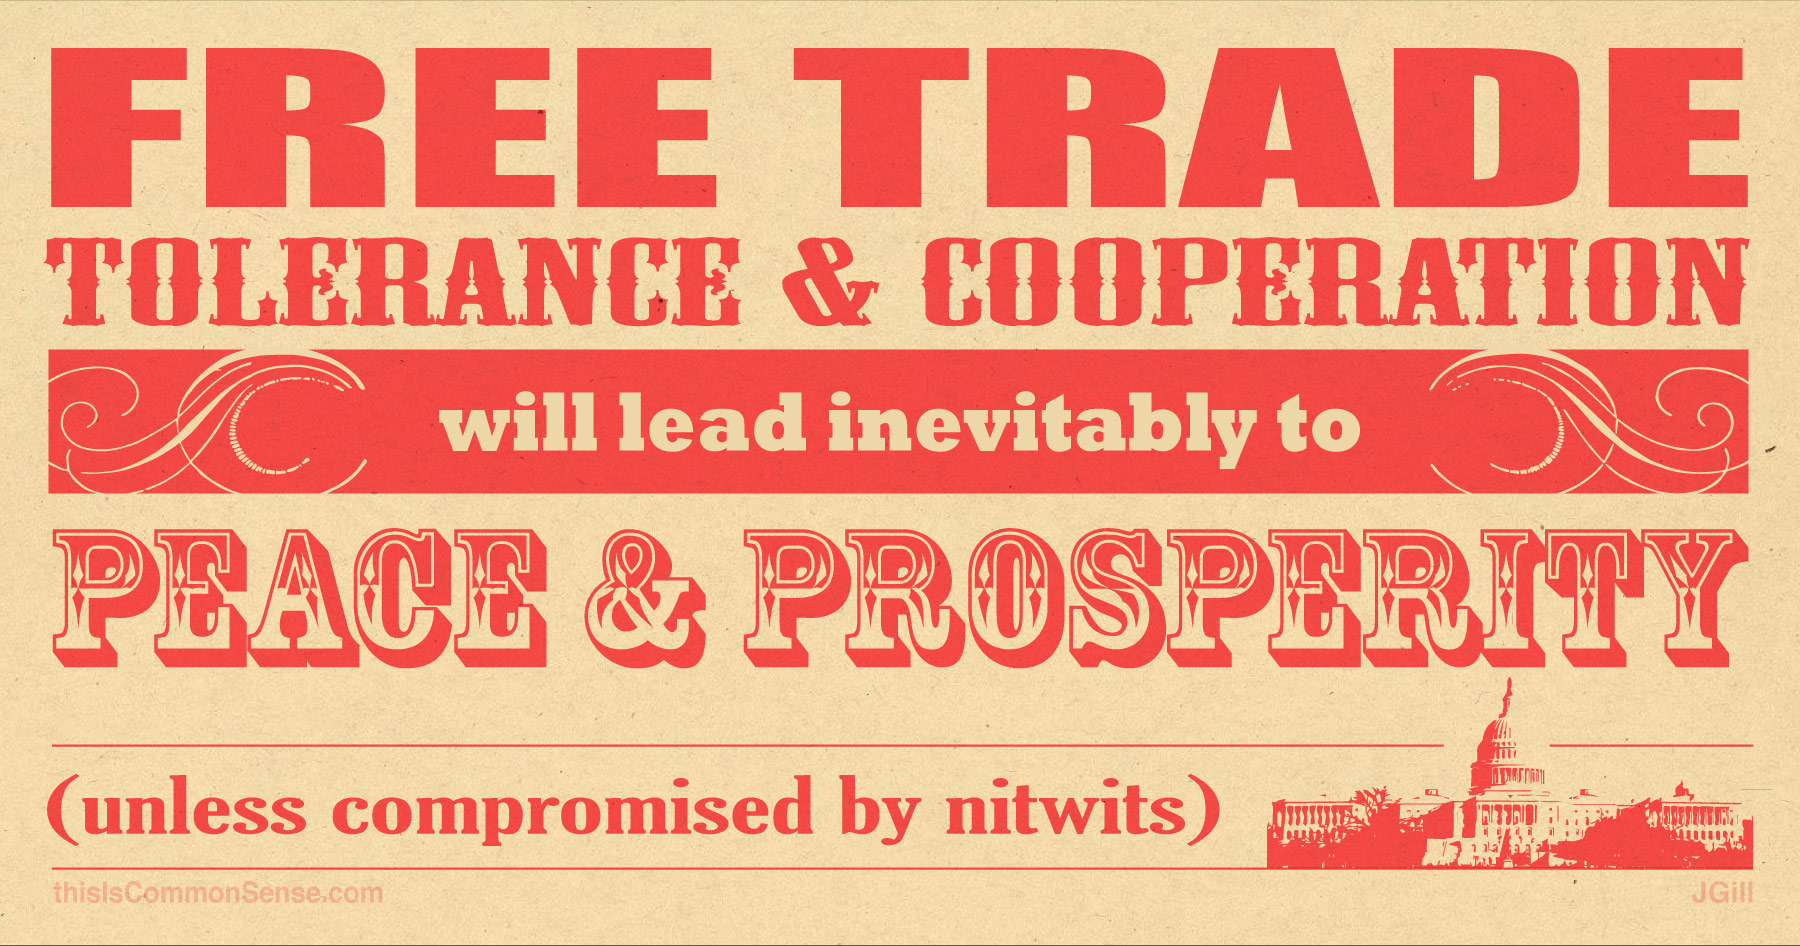 Free Trade, Tolerance and Cooperation lead to Peace and Prosperity